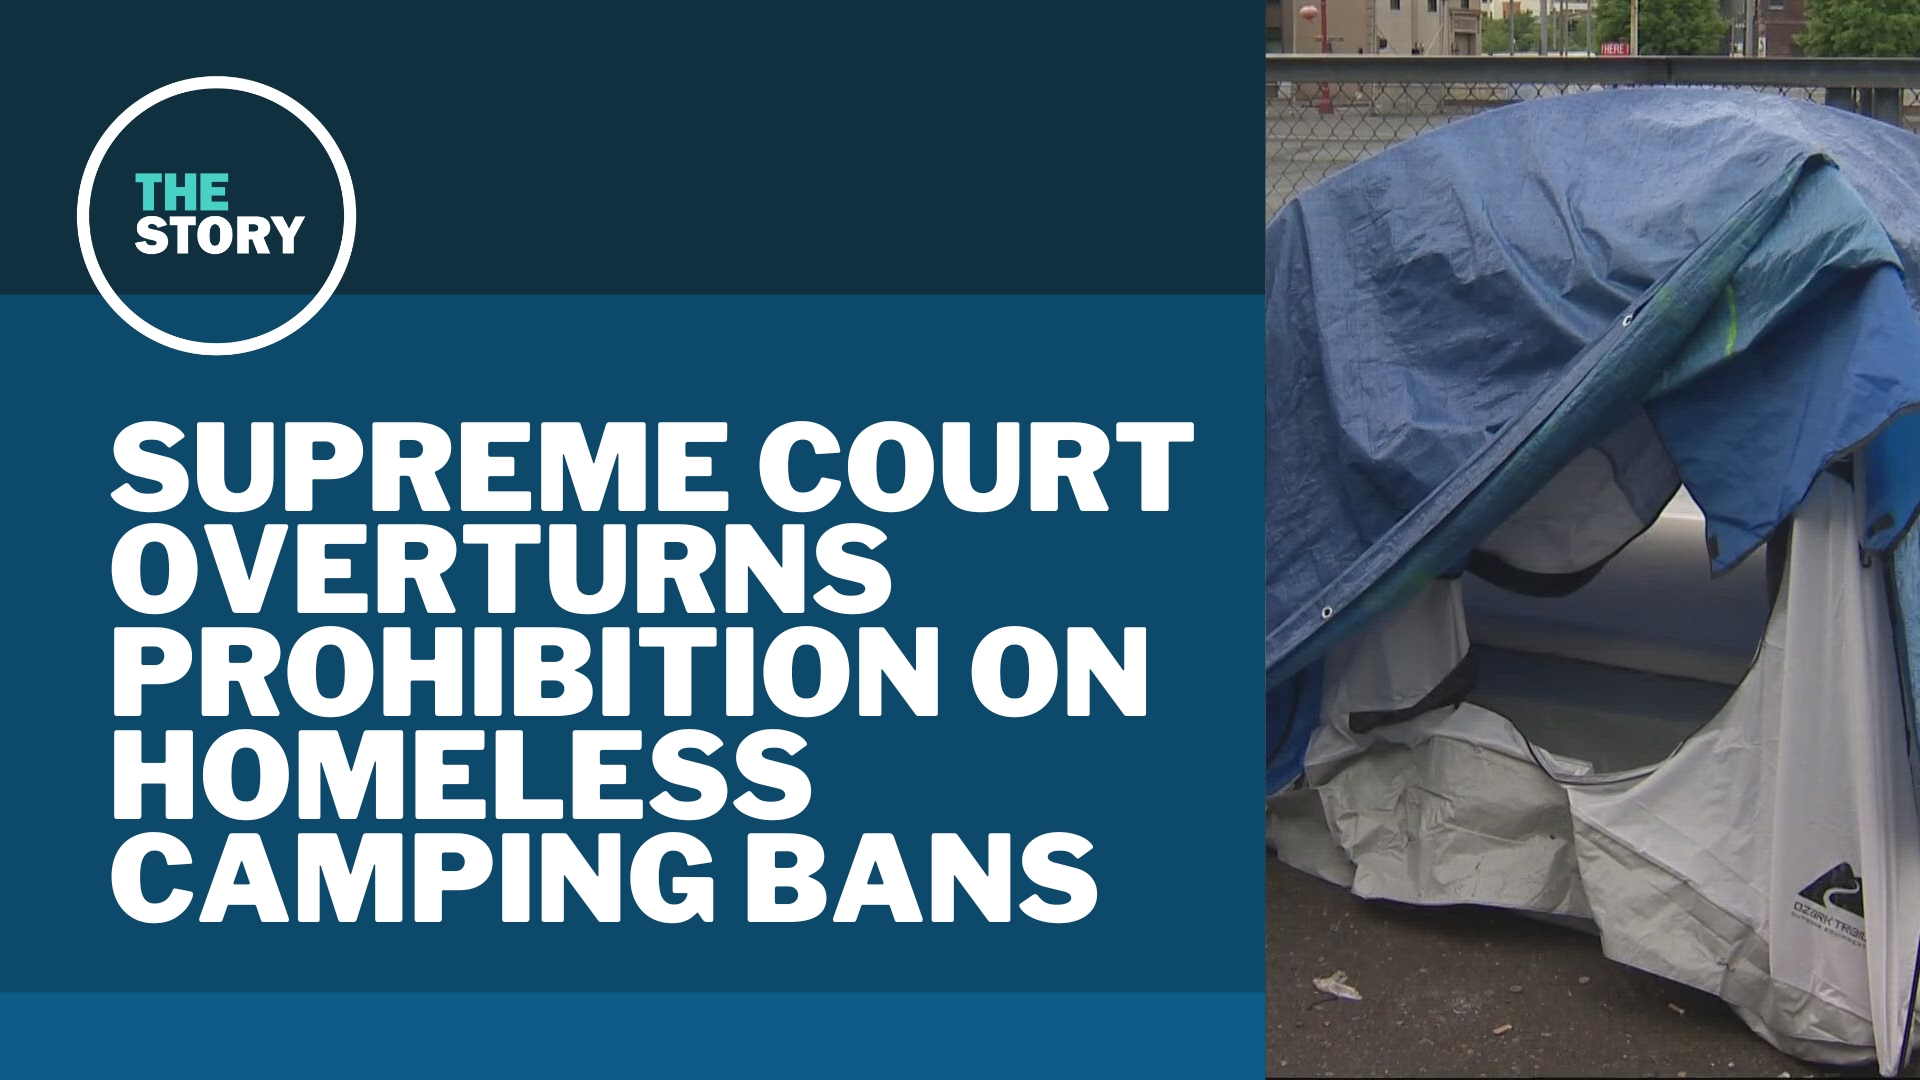 The conservative majority ruled that laws regulating camping on public property do not violate the U.S. Constitution’s ban on cruel and unusual punishment.